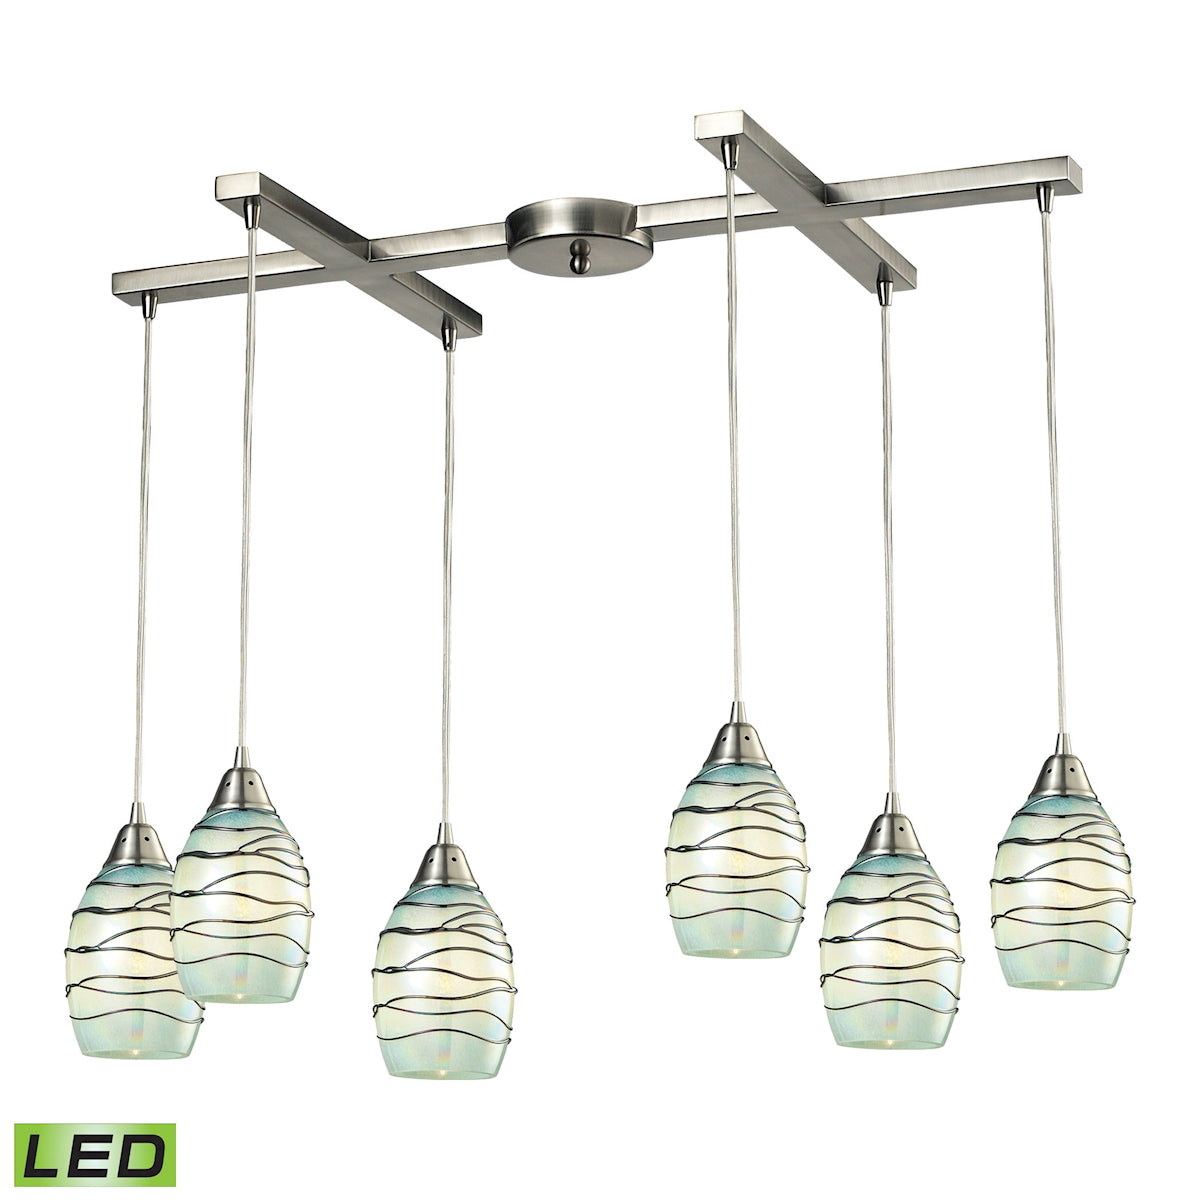 ELK Lighting 31348/6MN-LED Vines 6-Light H-Bar Pendant Fixture in Satin Nickel with Mint Glass - Includes LED Bulbs